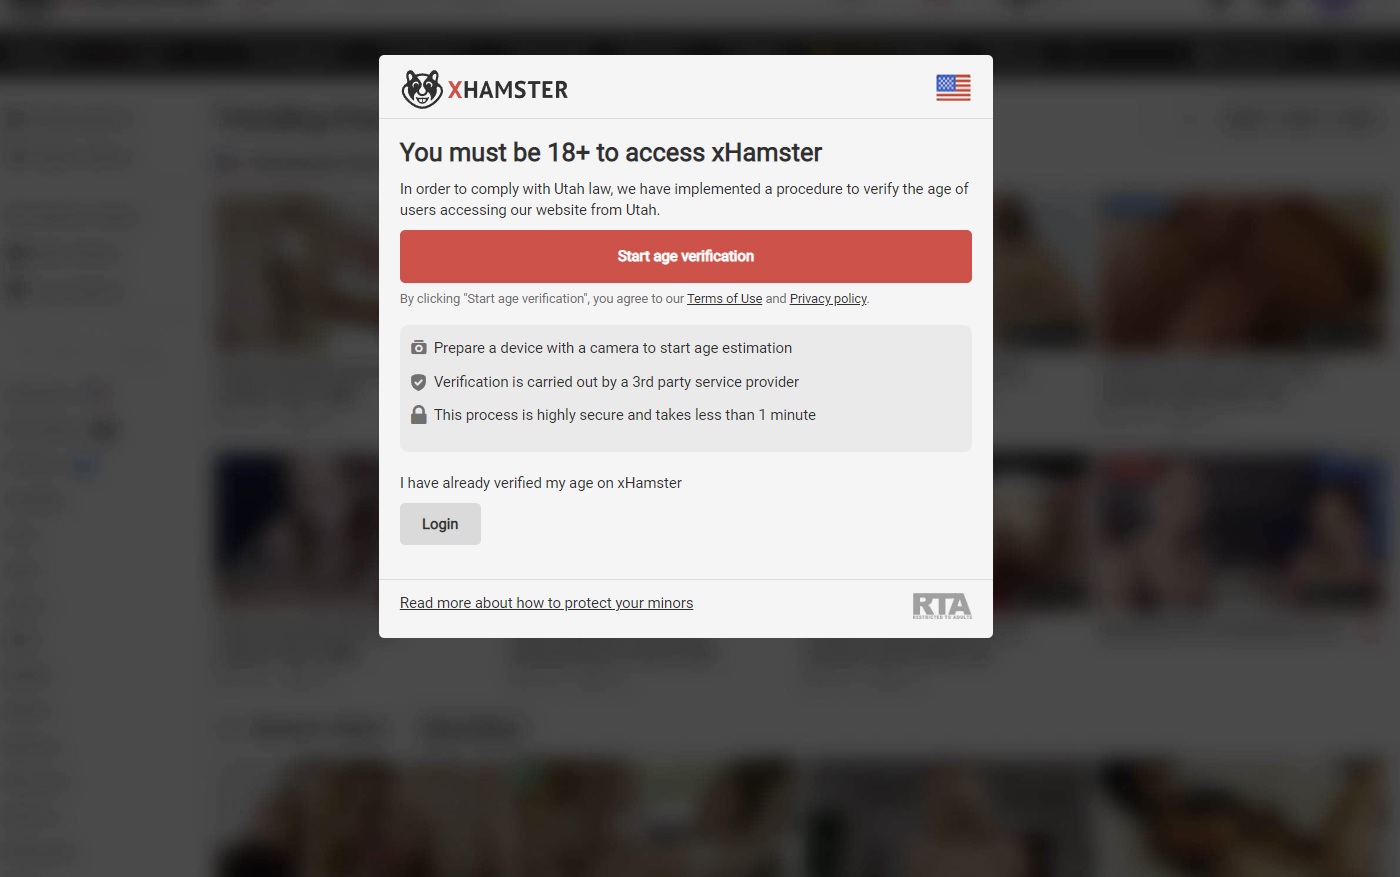 How to bypass xhamster age verification